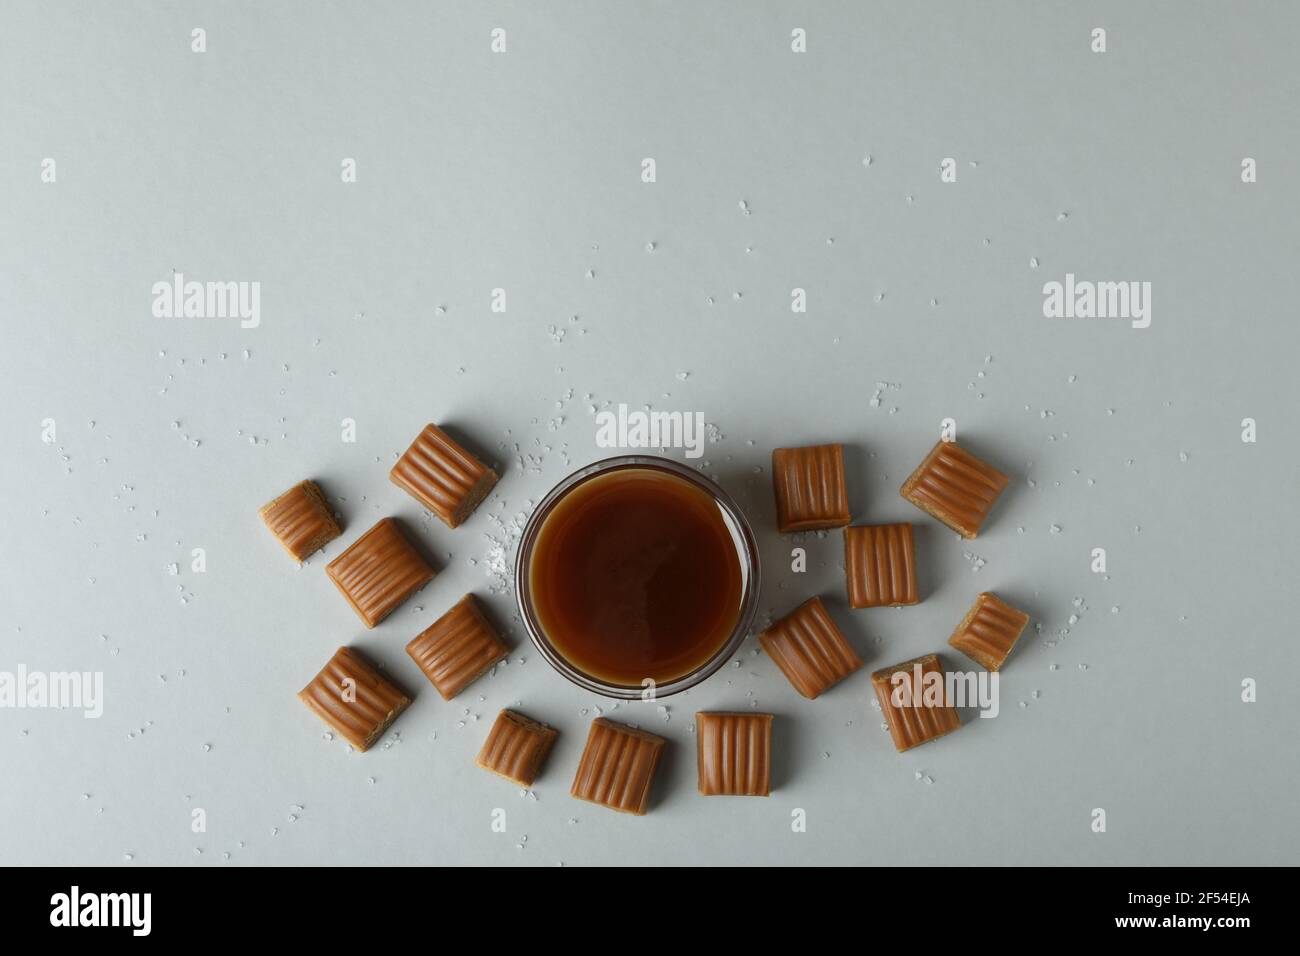 Salted caramel pieces and bowl of sauce on light gray background Stock Photo